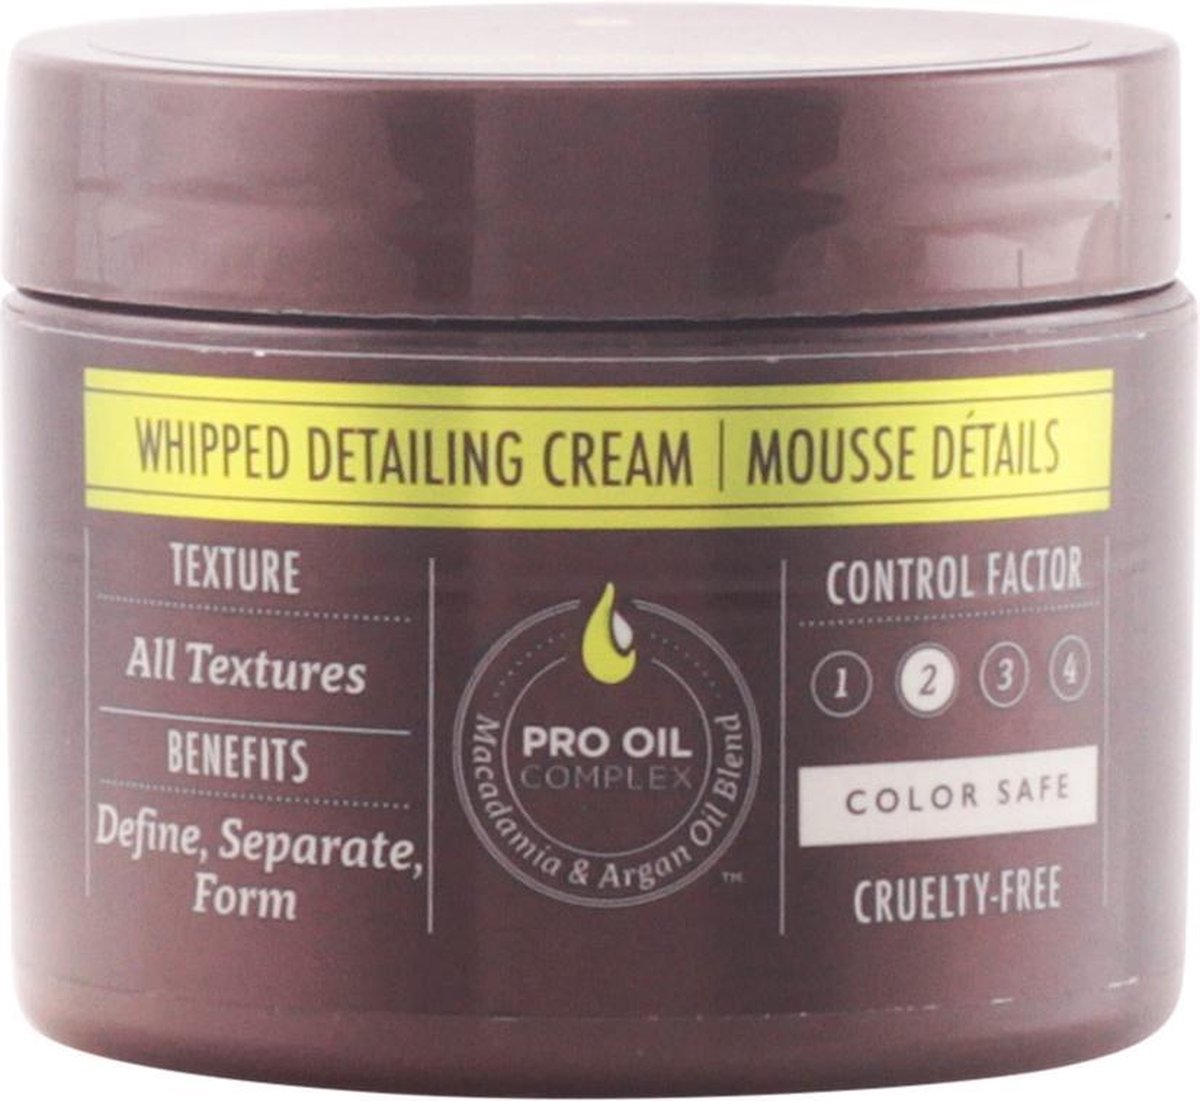 Macadamia - STYLING whipped detailing cream 57 gr